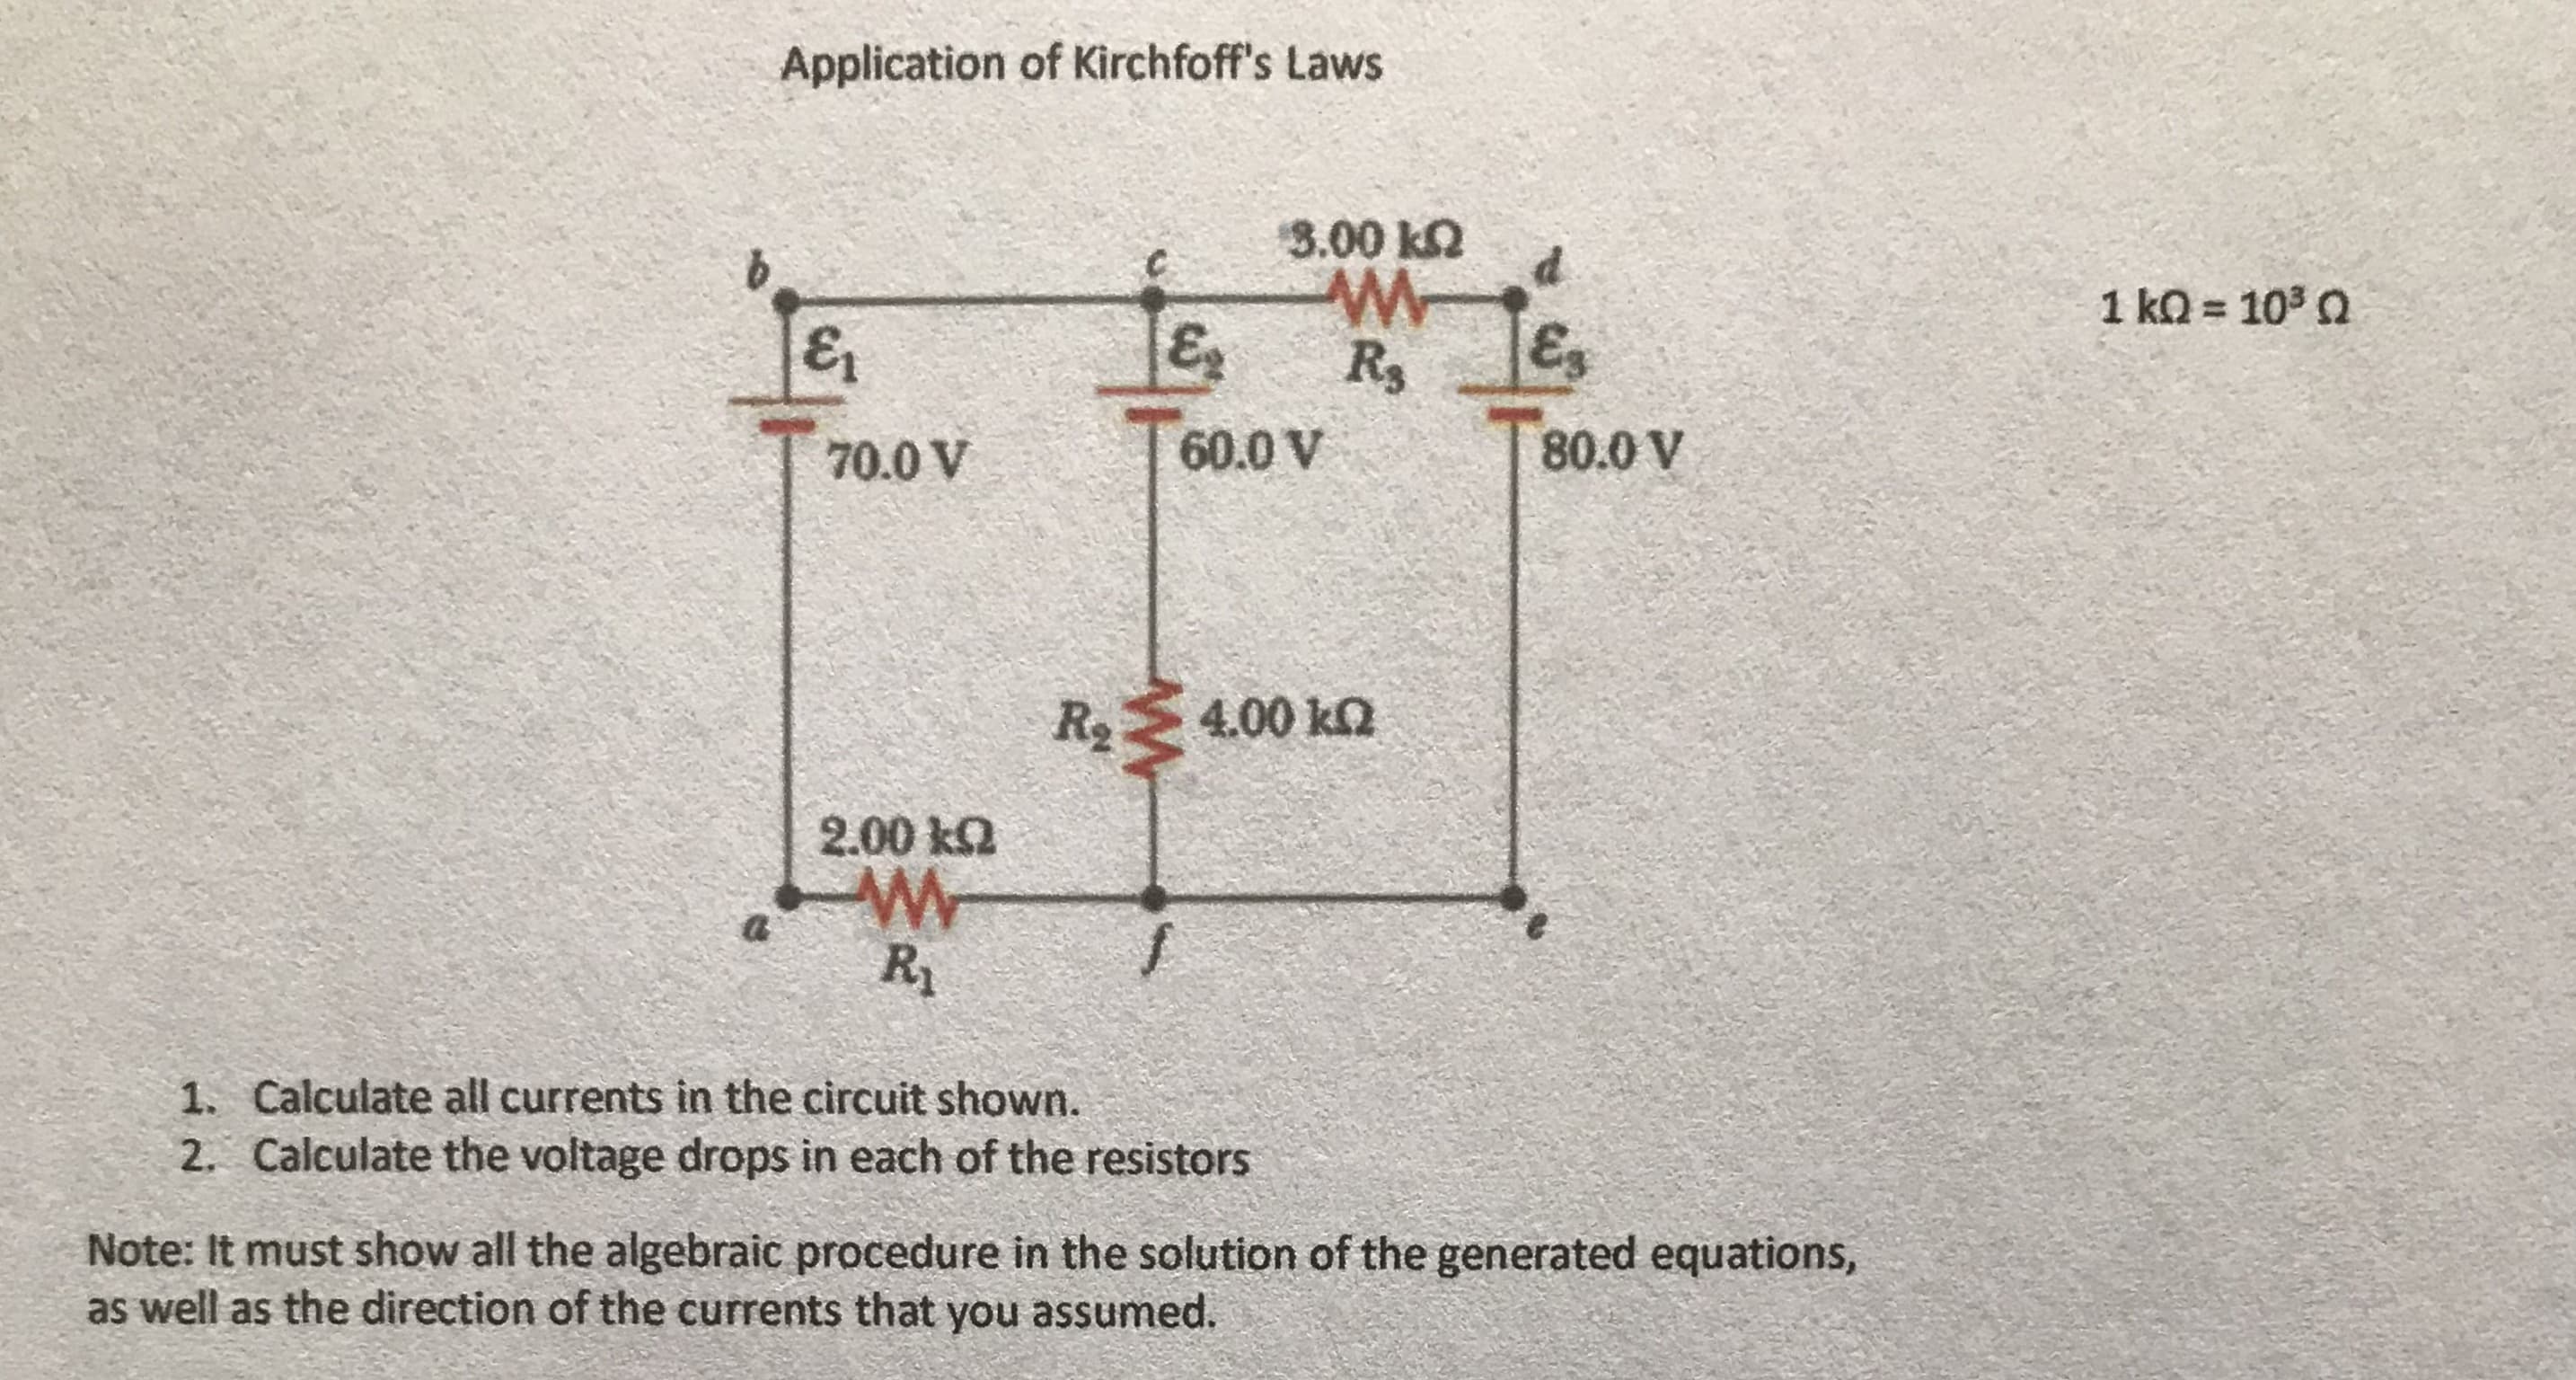 Application of Kirchfoff's Laws
3.00 k2
1 kQ = 103 0
E.
R3
E
70.0 V
60.0 V
80.0 V
4.00 ka
2.00 ka
1. Calculate all currents in the circuit shown.
2. Calculate the voltage drops in each of the resistors
